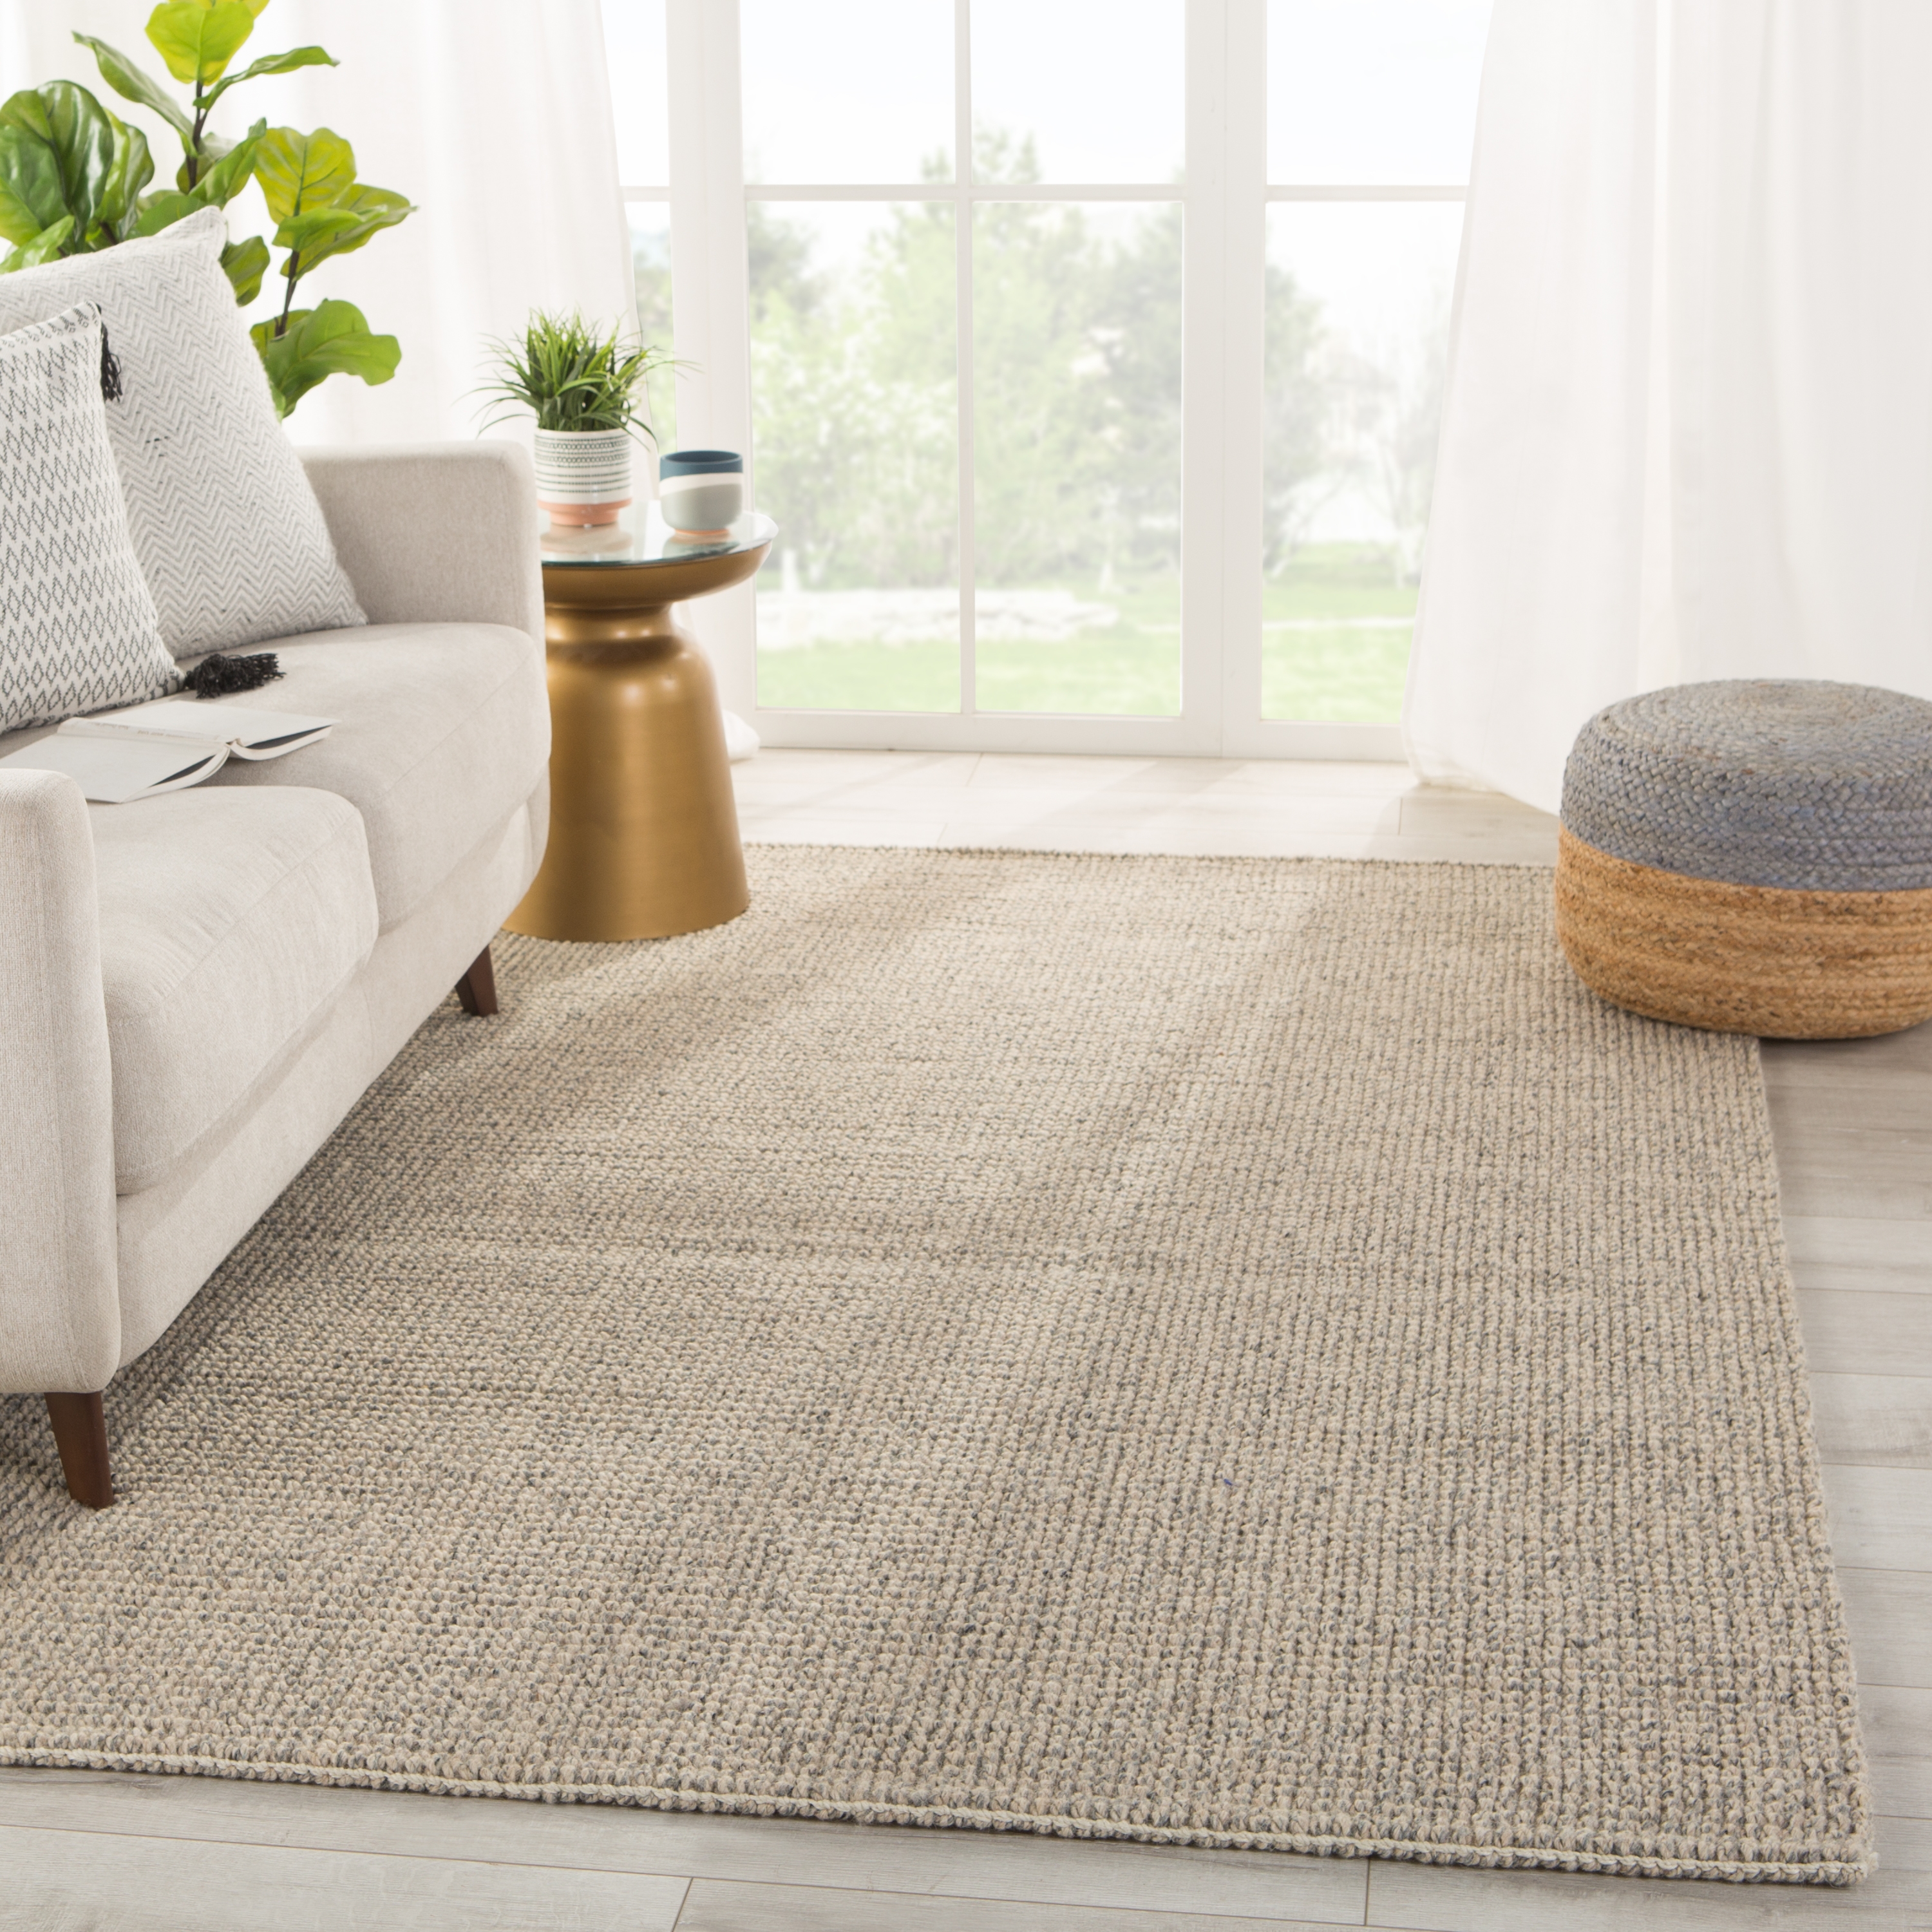 Chael Natural Solid Gray/ Beige Area Rug (9'X12') - Image 4